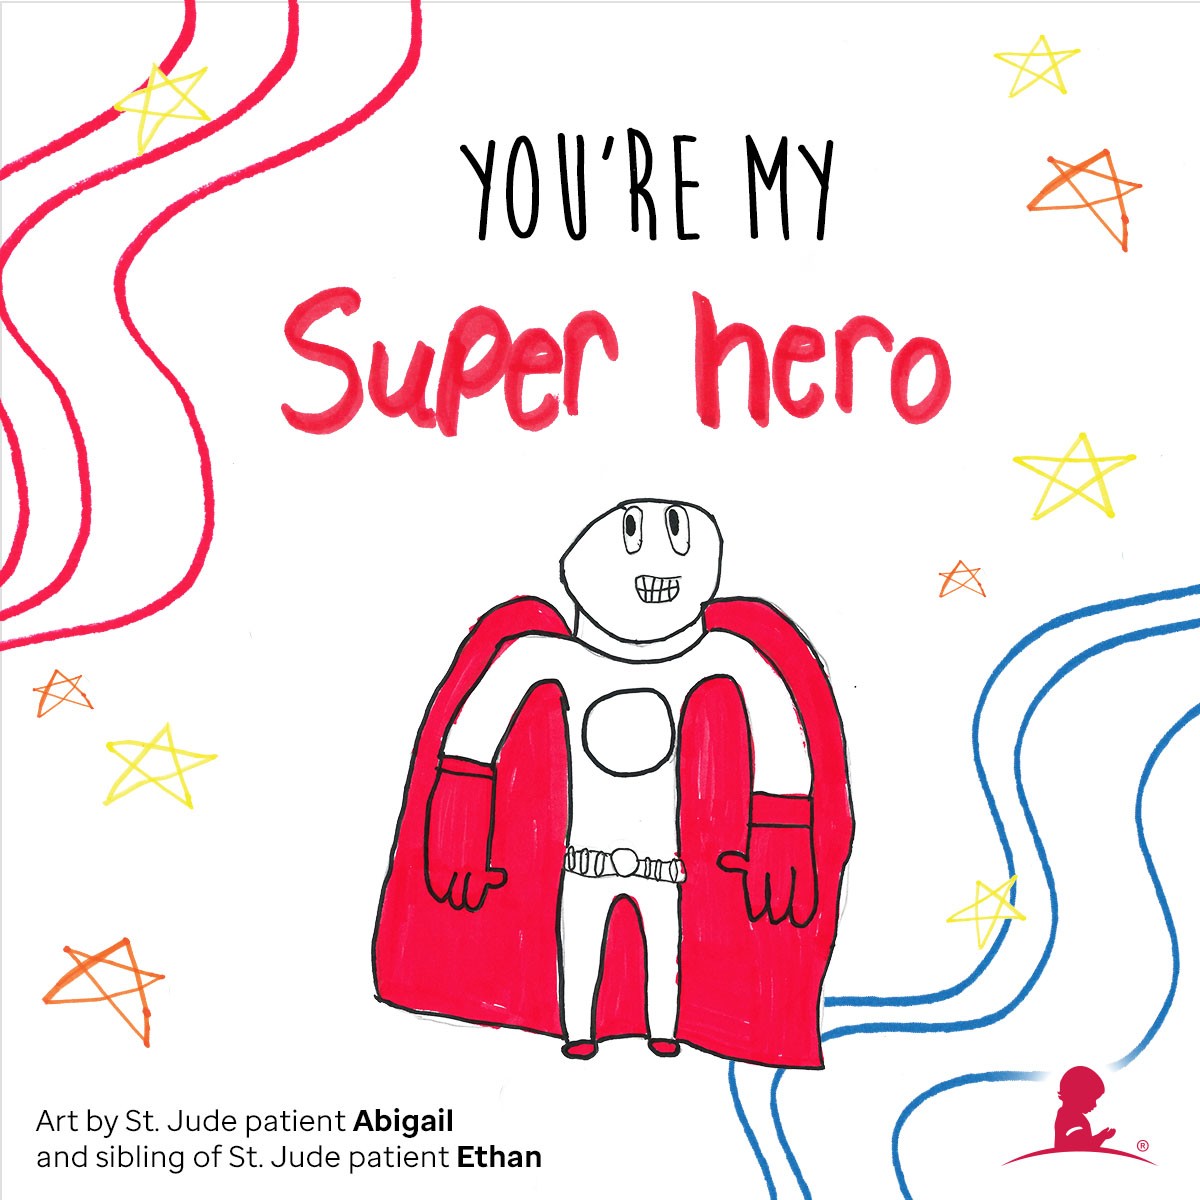 Superhero artwork by St. Jude patient Abigail and sibling of St. Jude patient Ethan